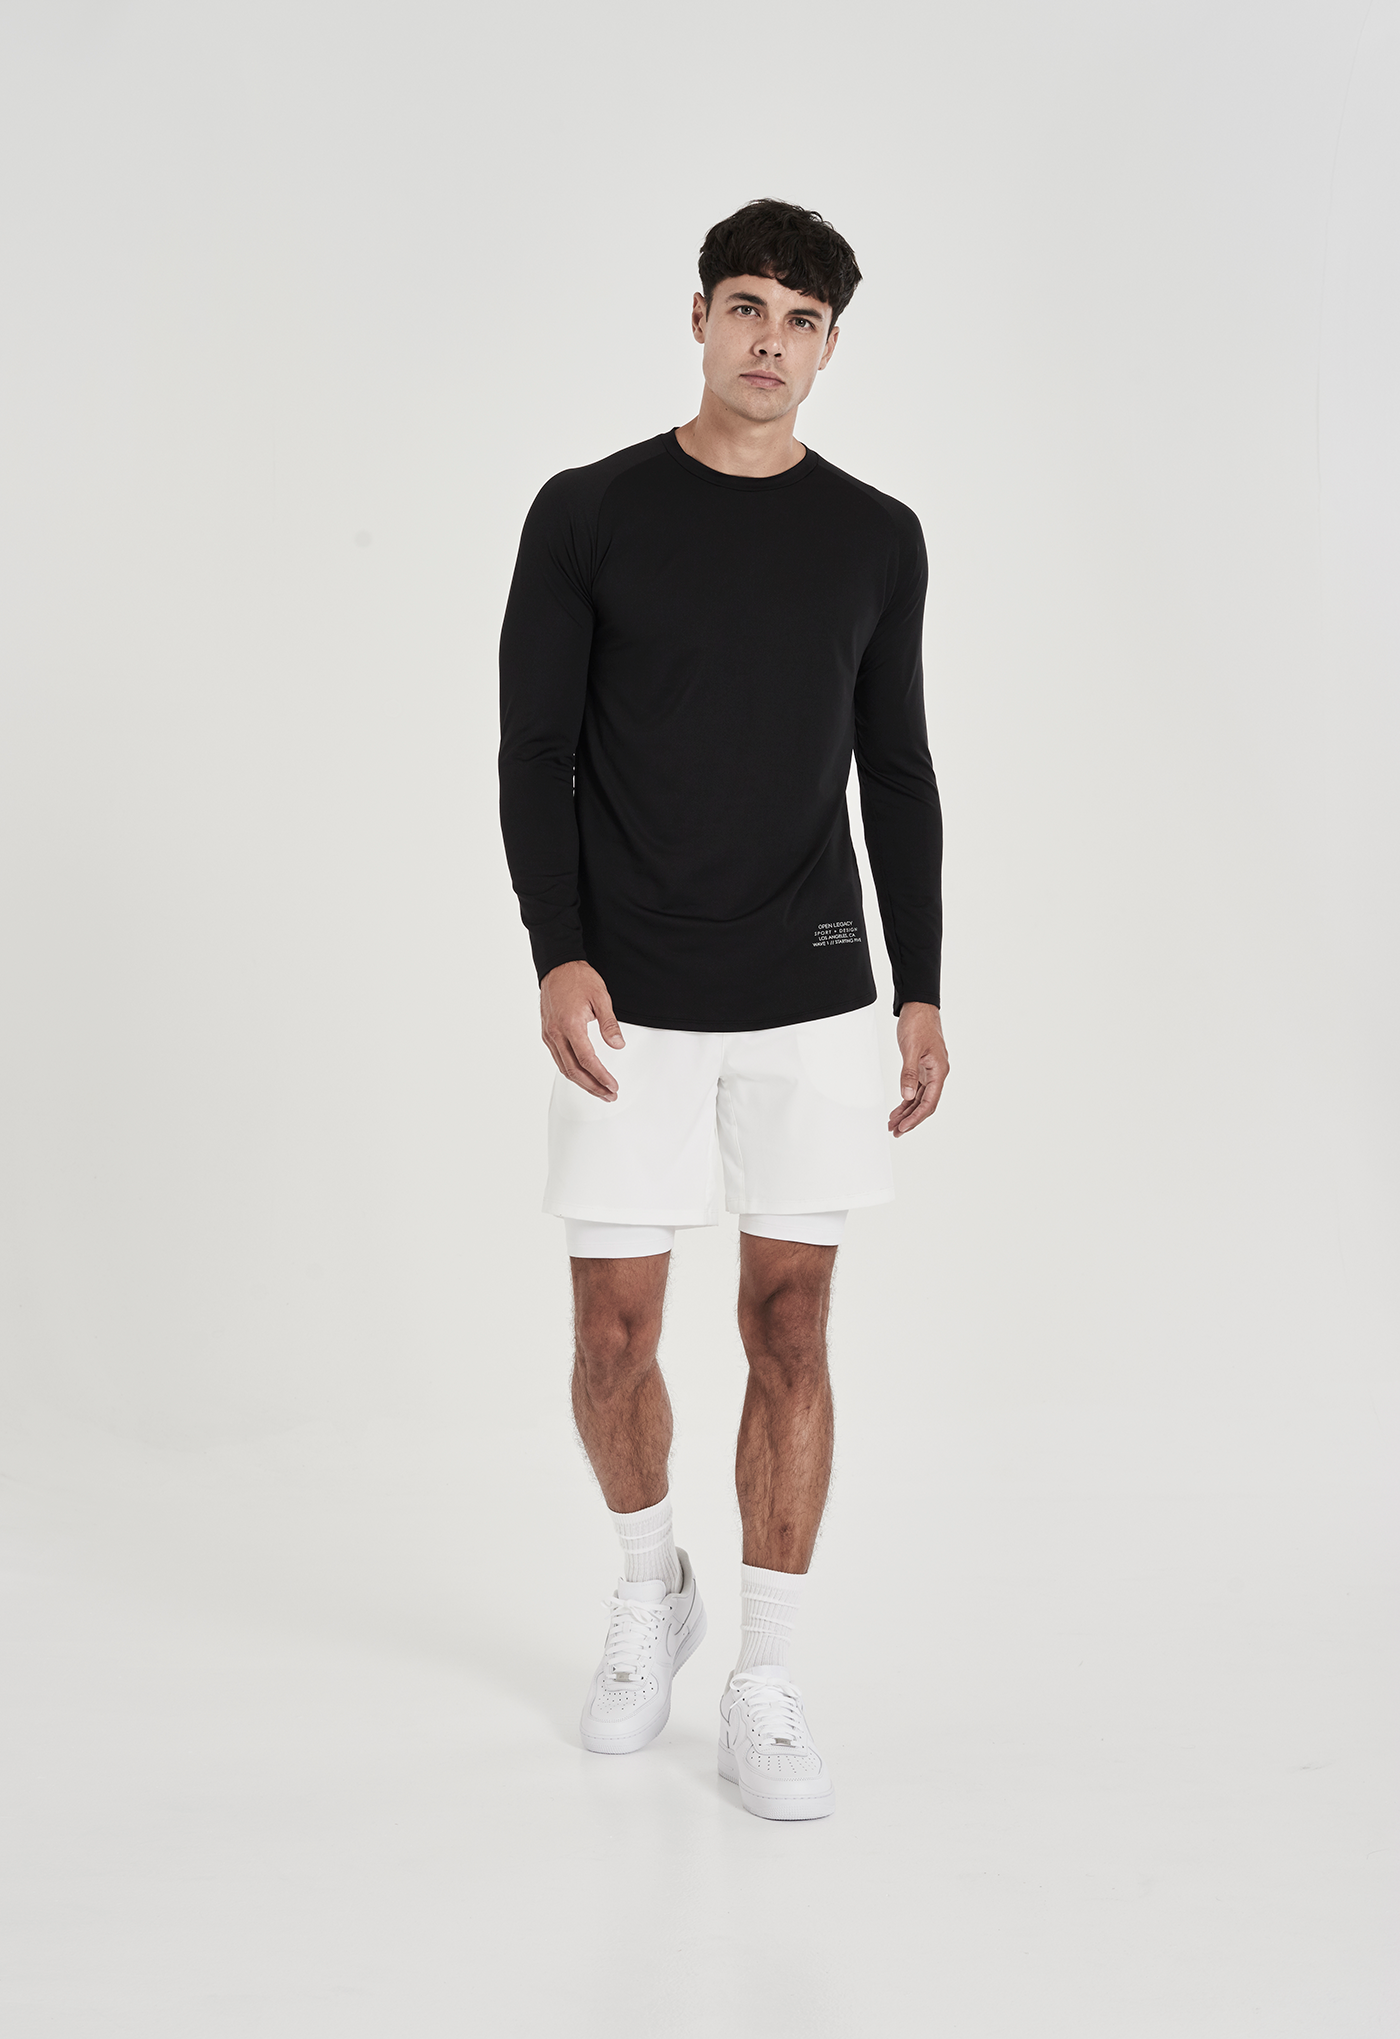 Men's Black Athleisure Shirts Made in Los Angeles, CA